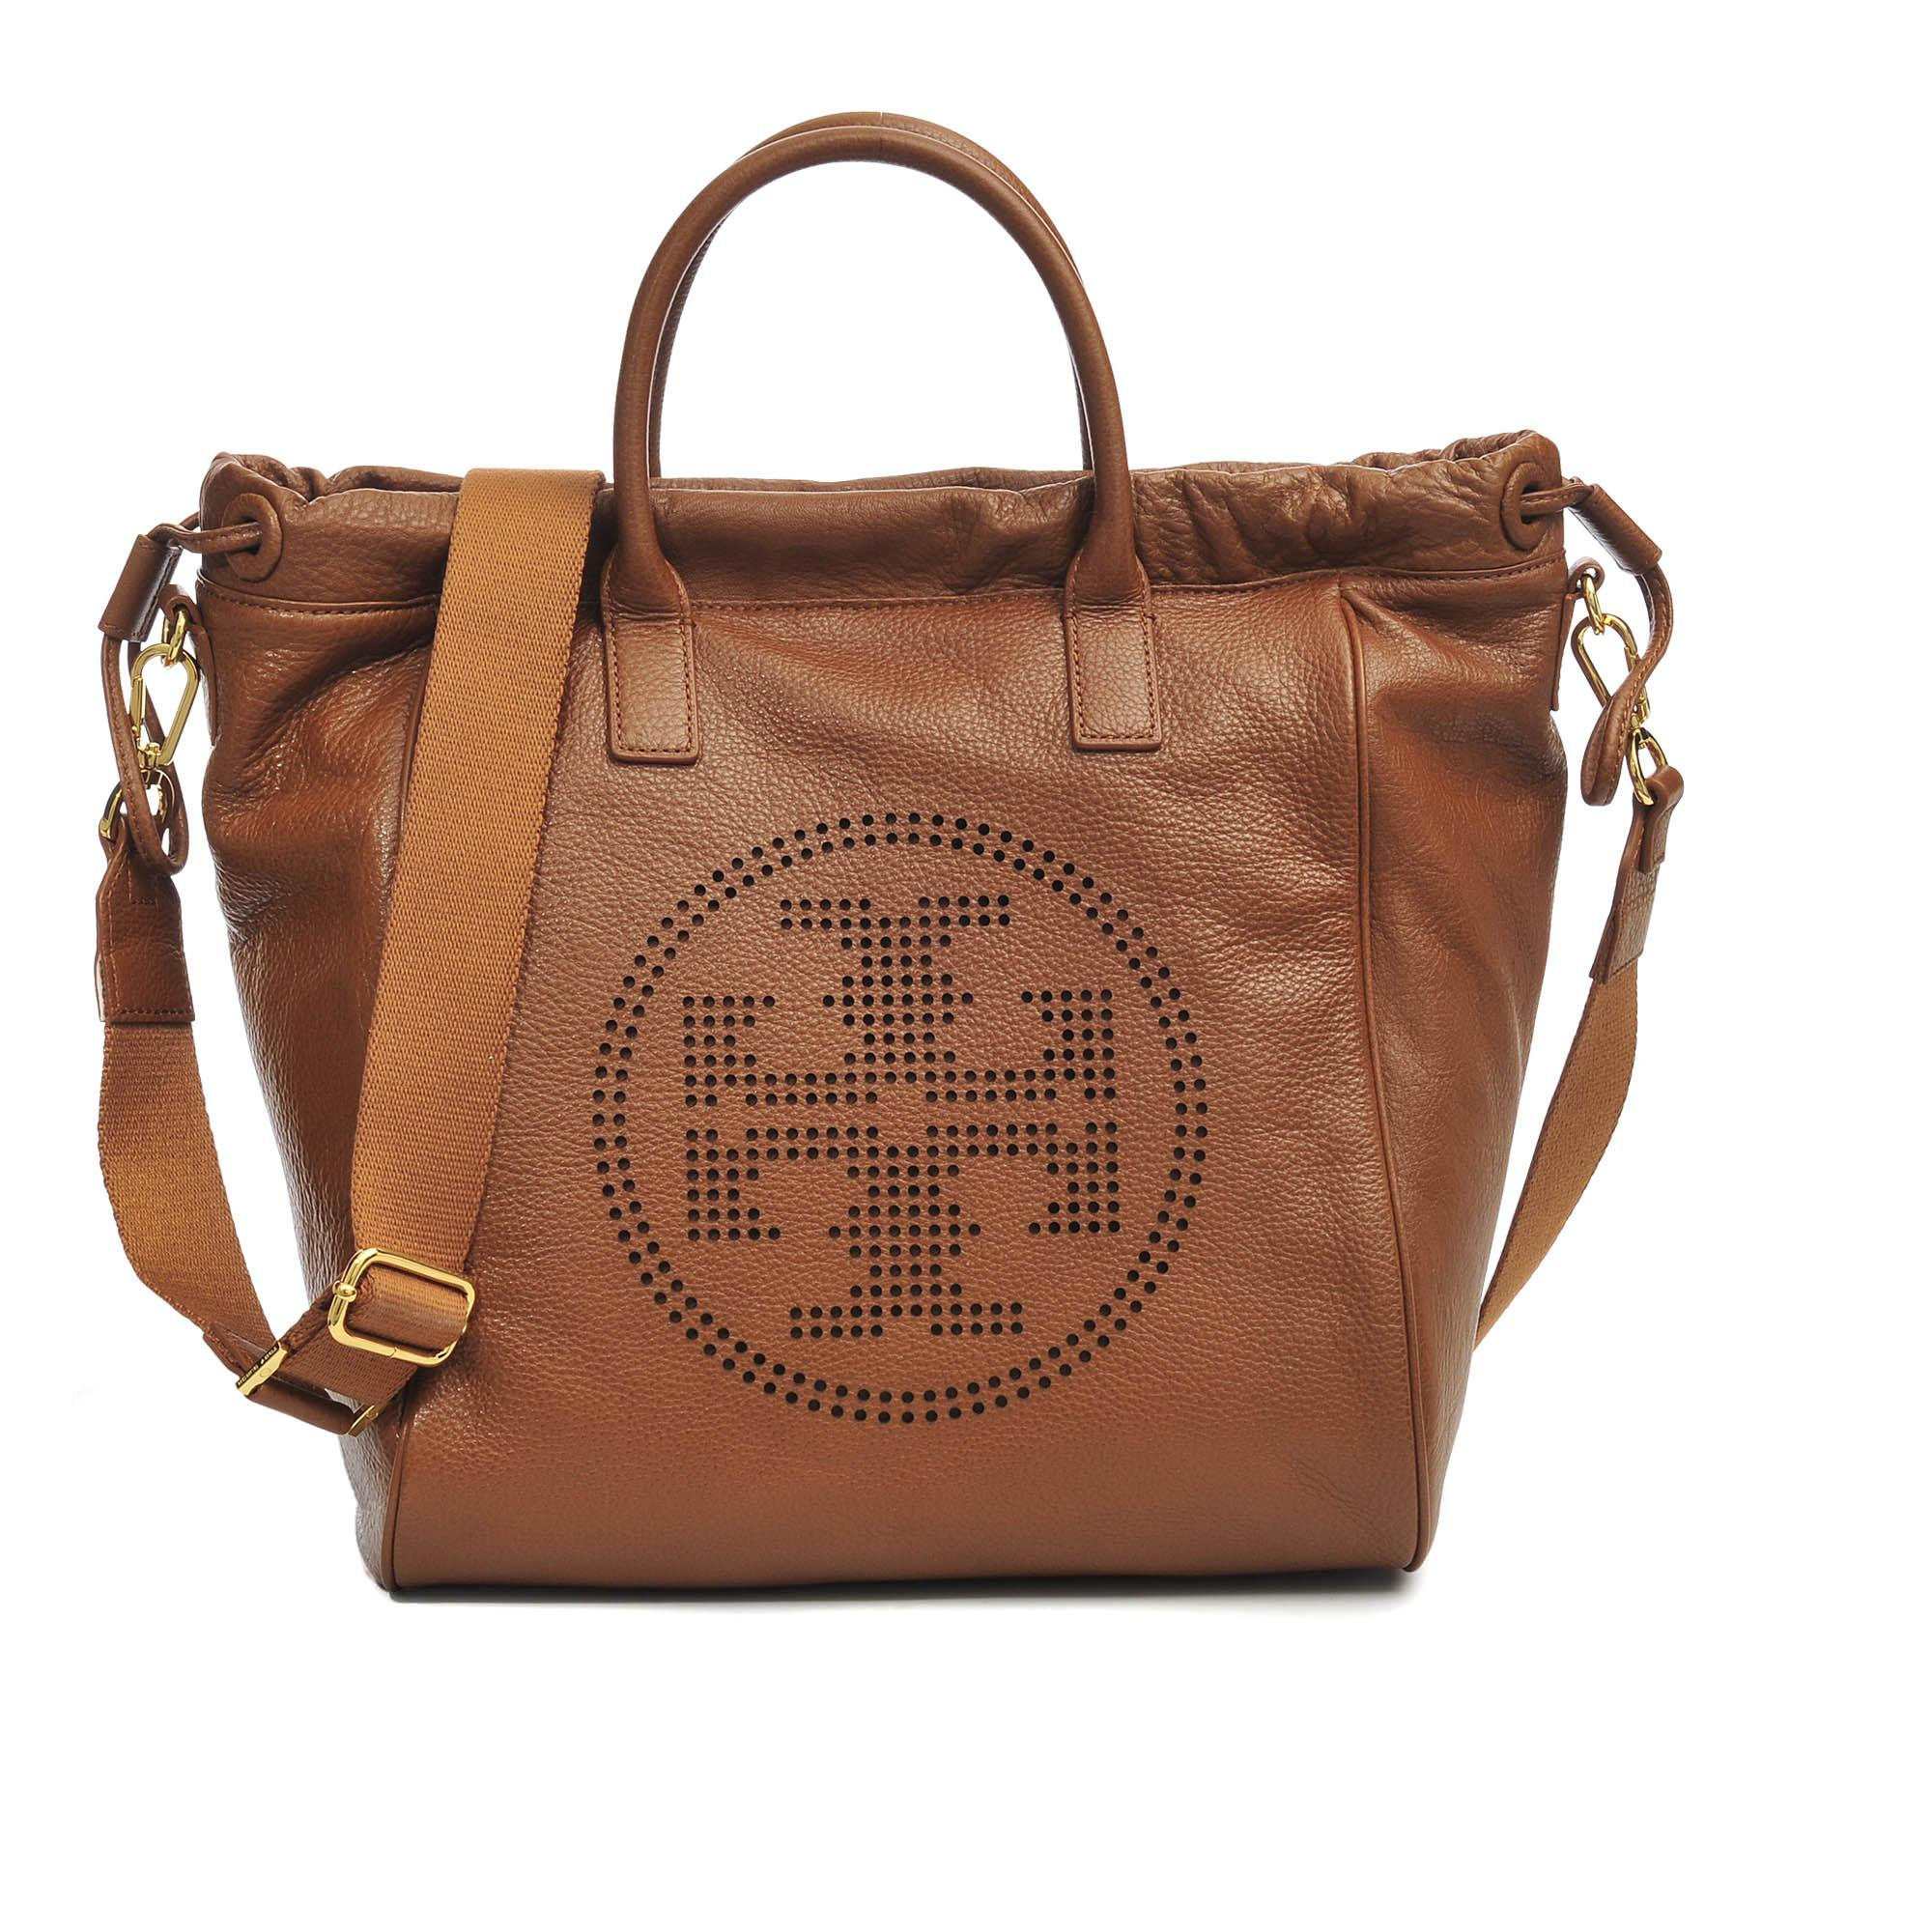 Tory Burch Perforated Logo Bag in Brown | Lyst